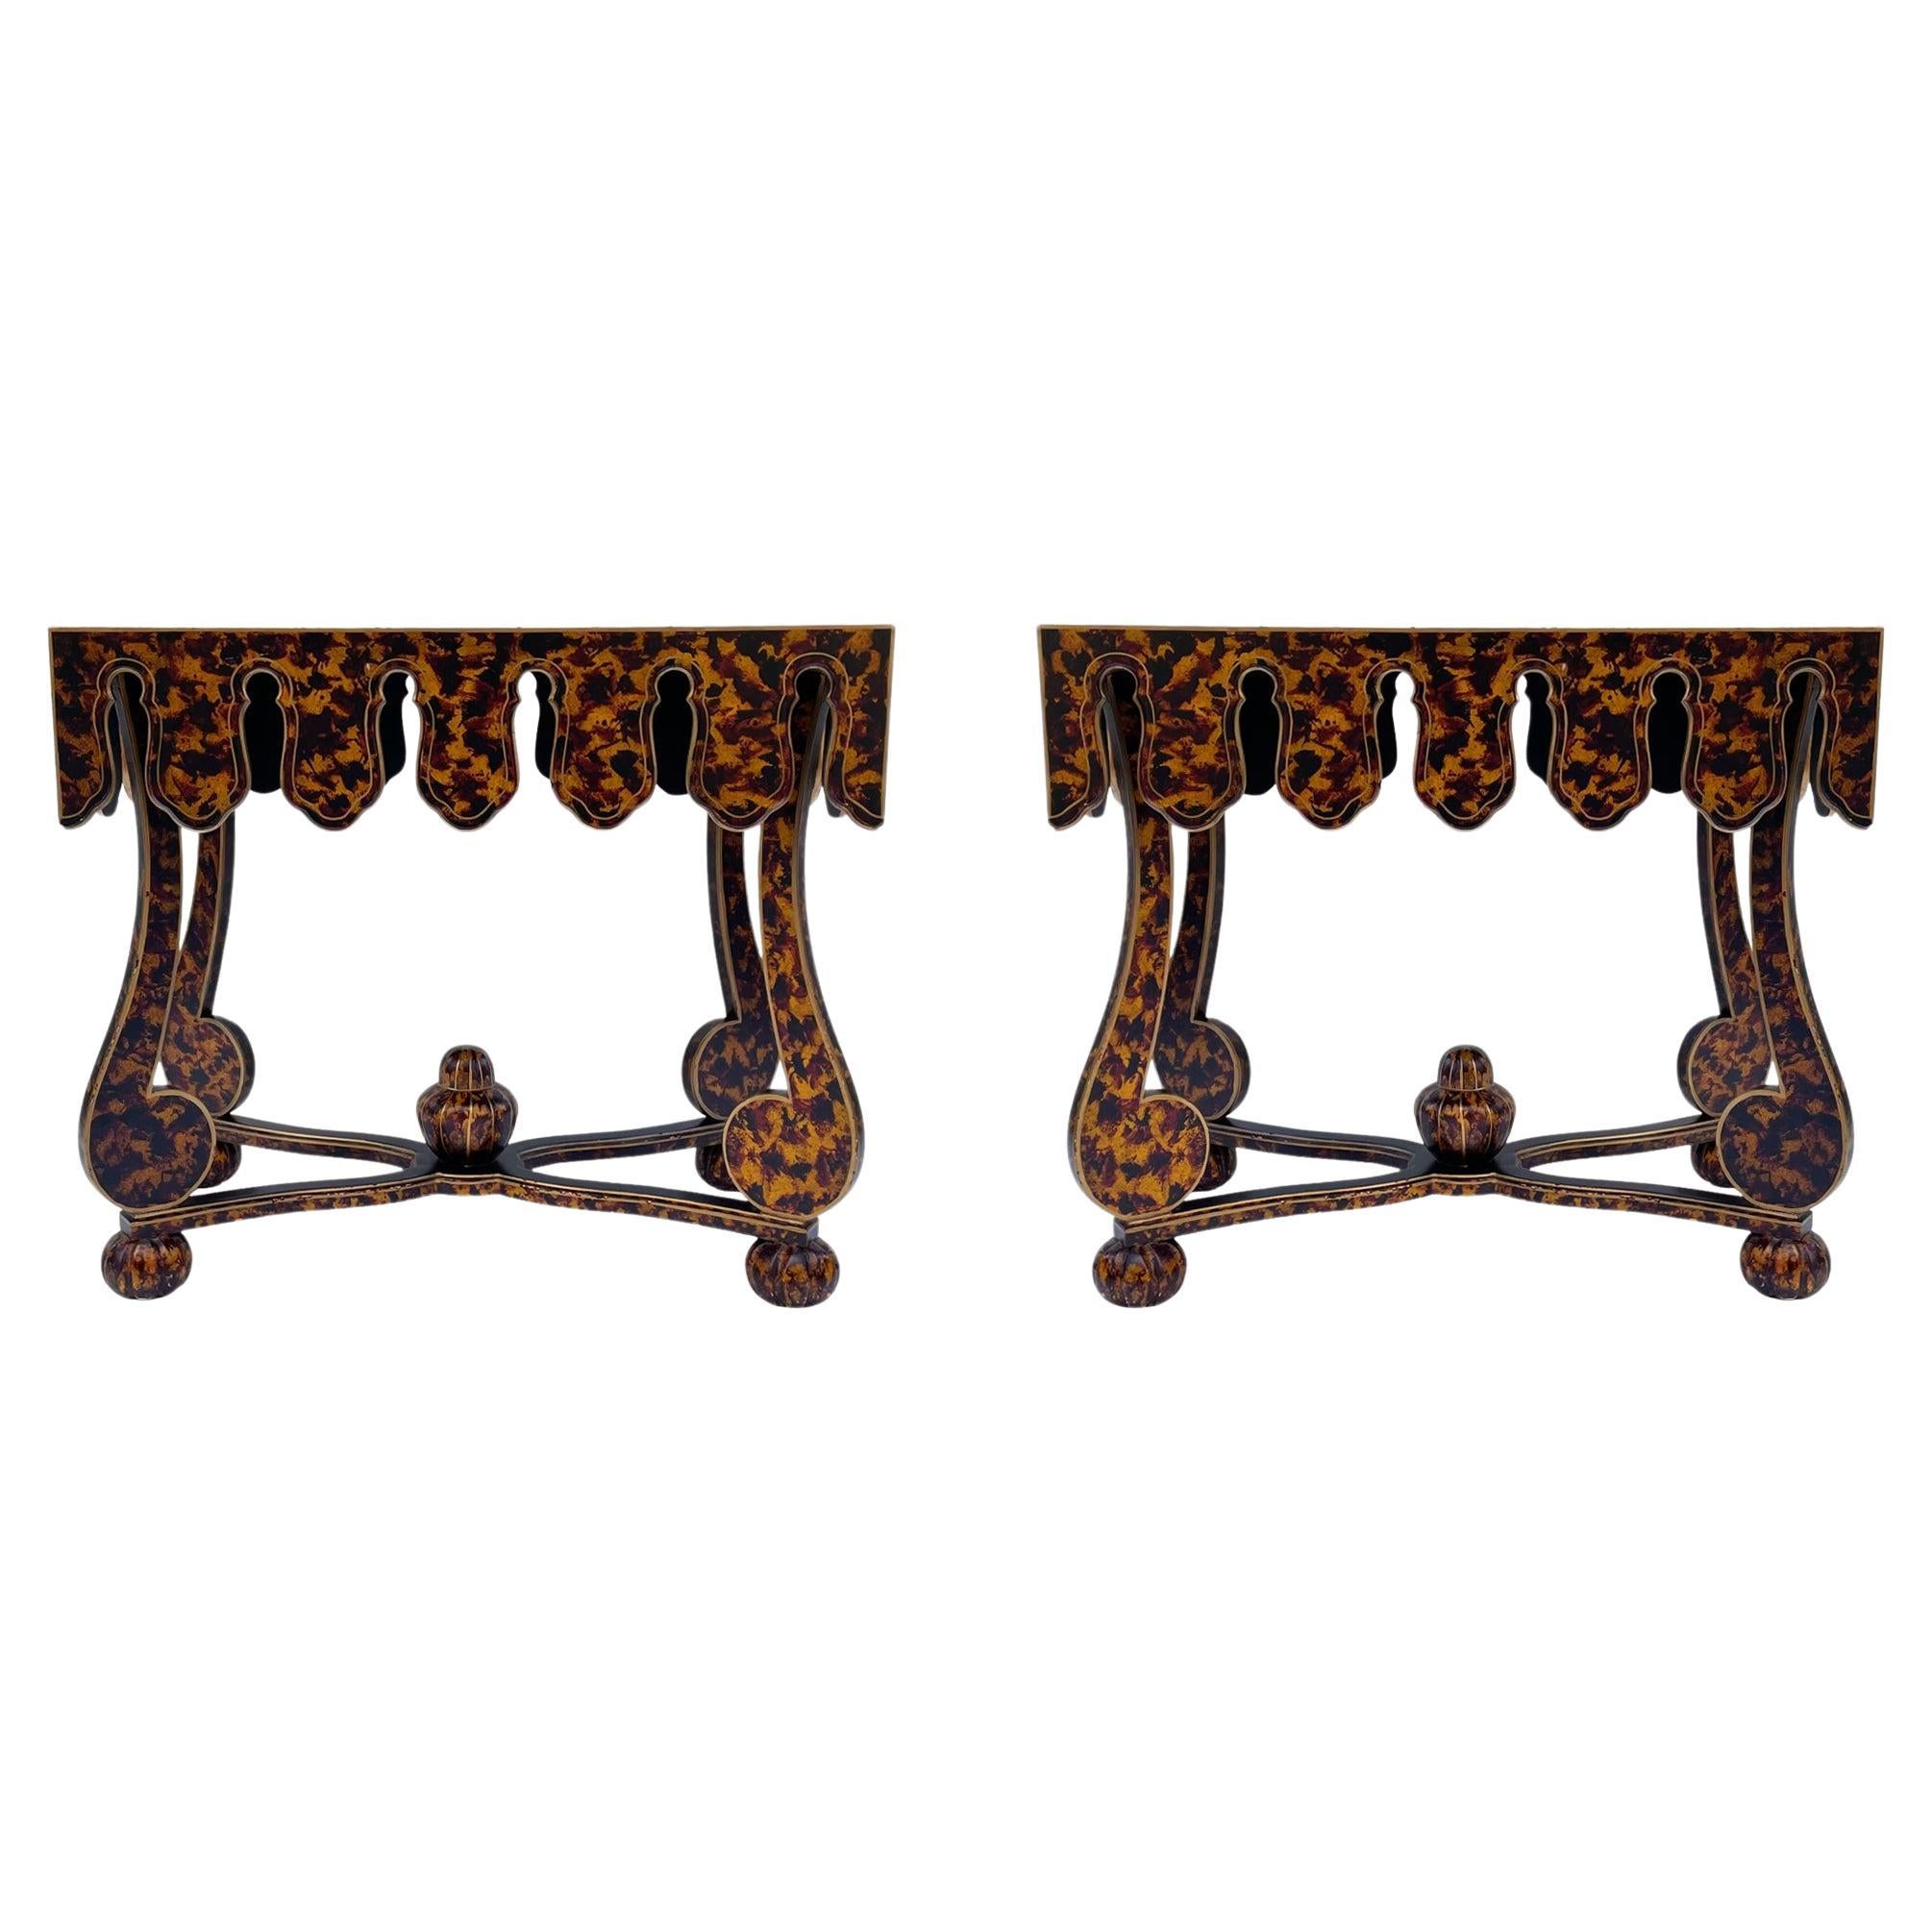 Hollywood Regency Faux Tortoise Shell End Tables or Oversized Night Stands 